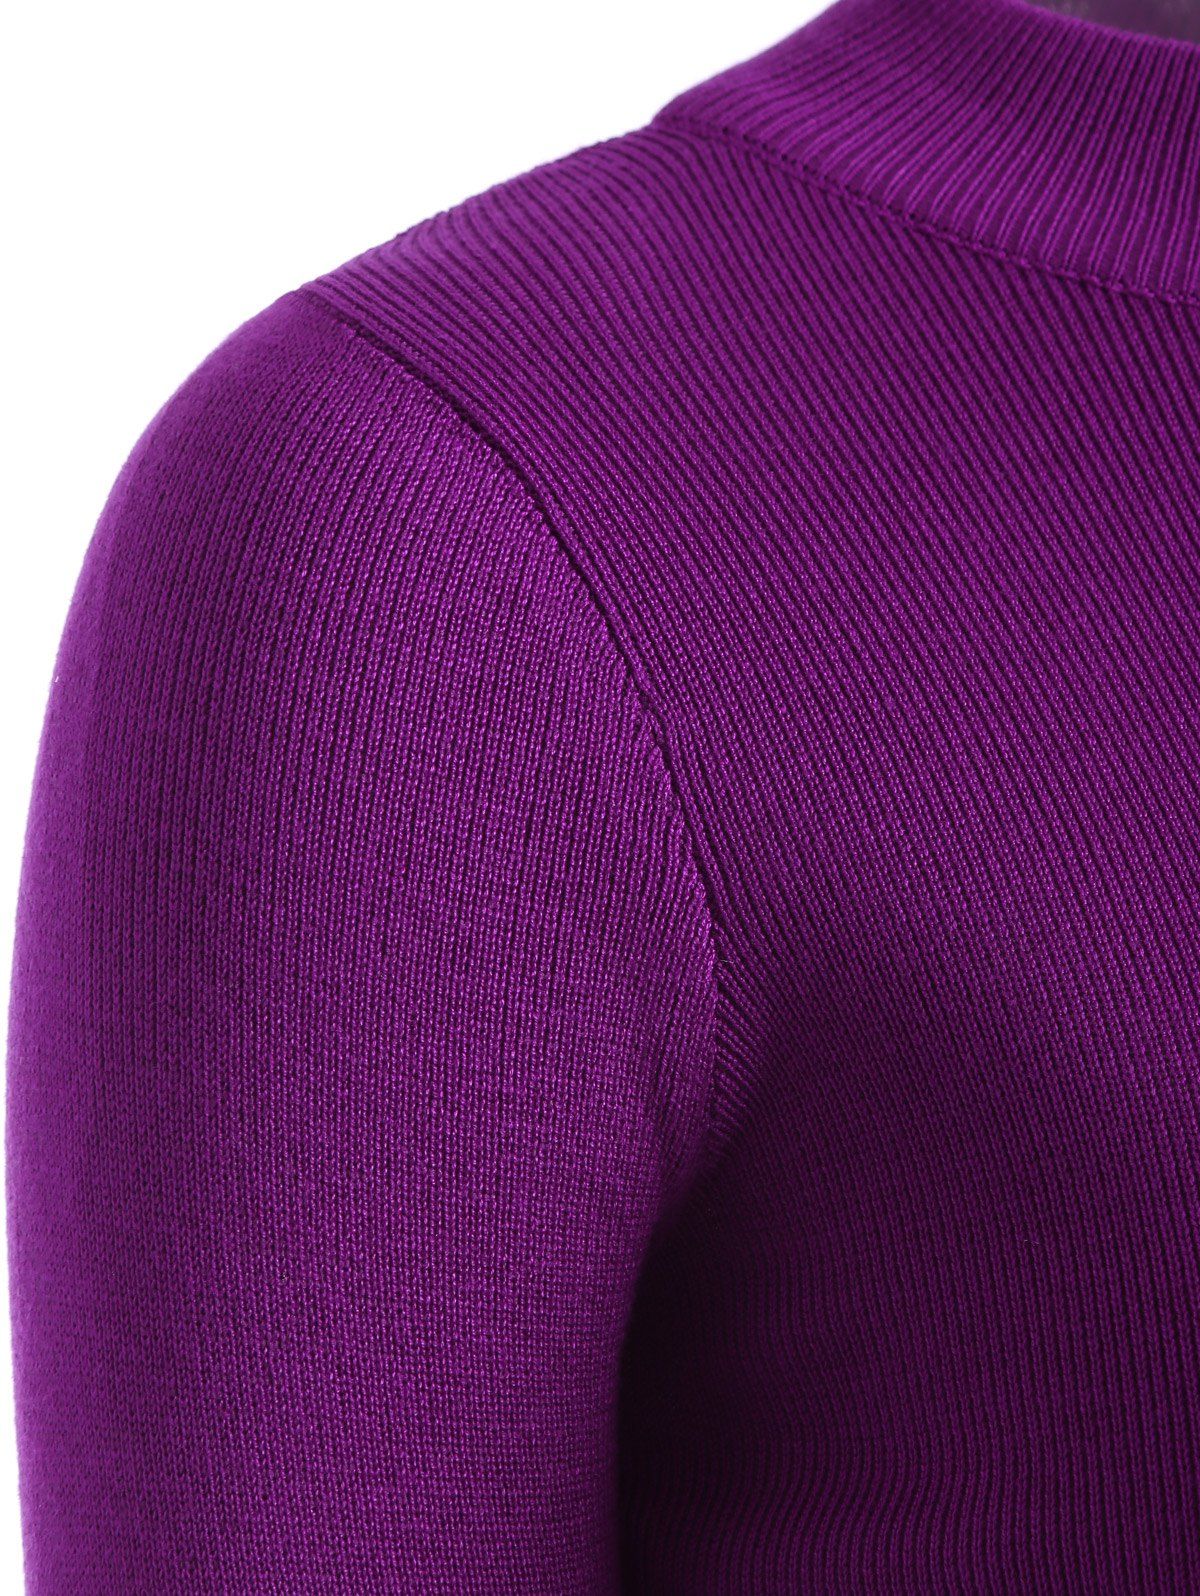 2018 Keyhole Ribbed Sweater PURPLE ONE SIZE In Sweaters & Cardigans ...